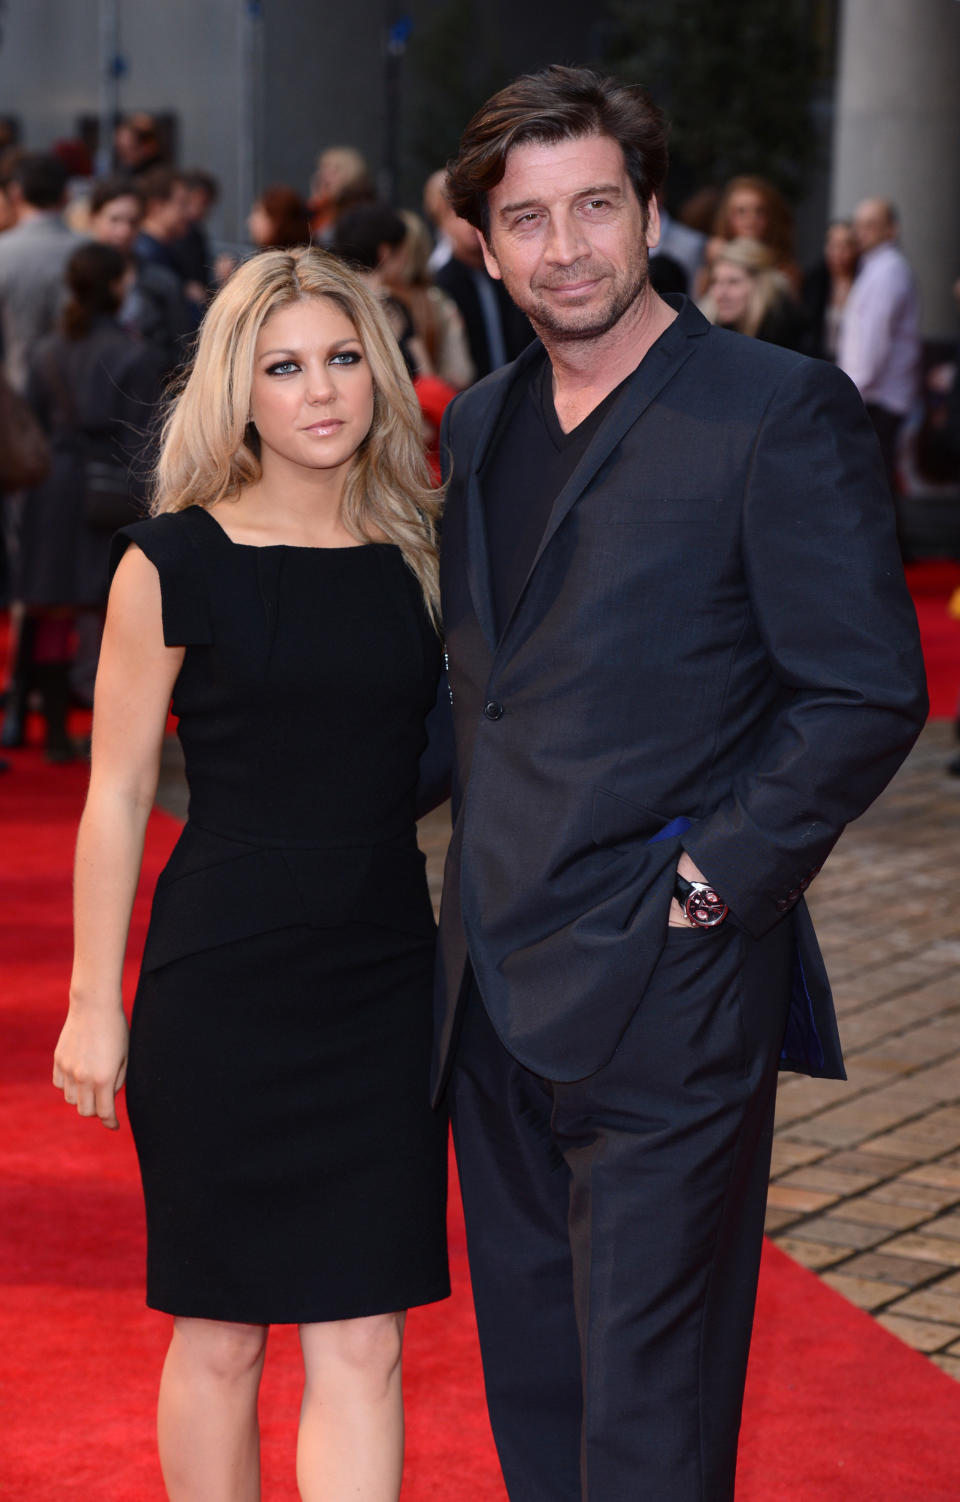 Nick Knowles and girlfriend at the World Premiere of The Dictator, The Royal Festival Hall, South Bank, London.